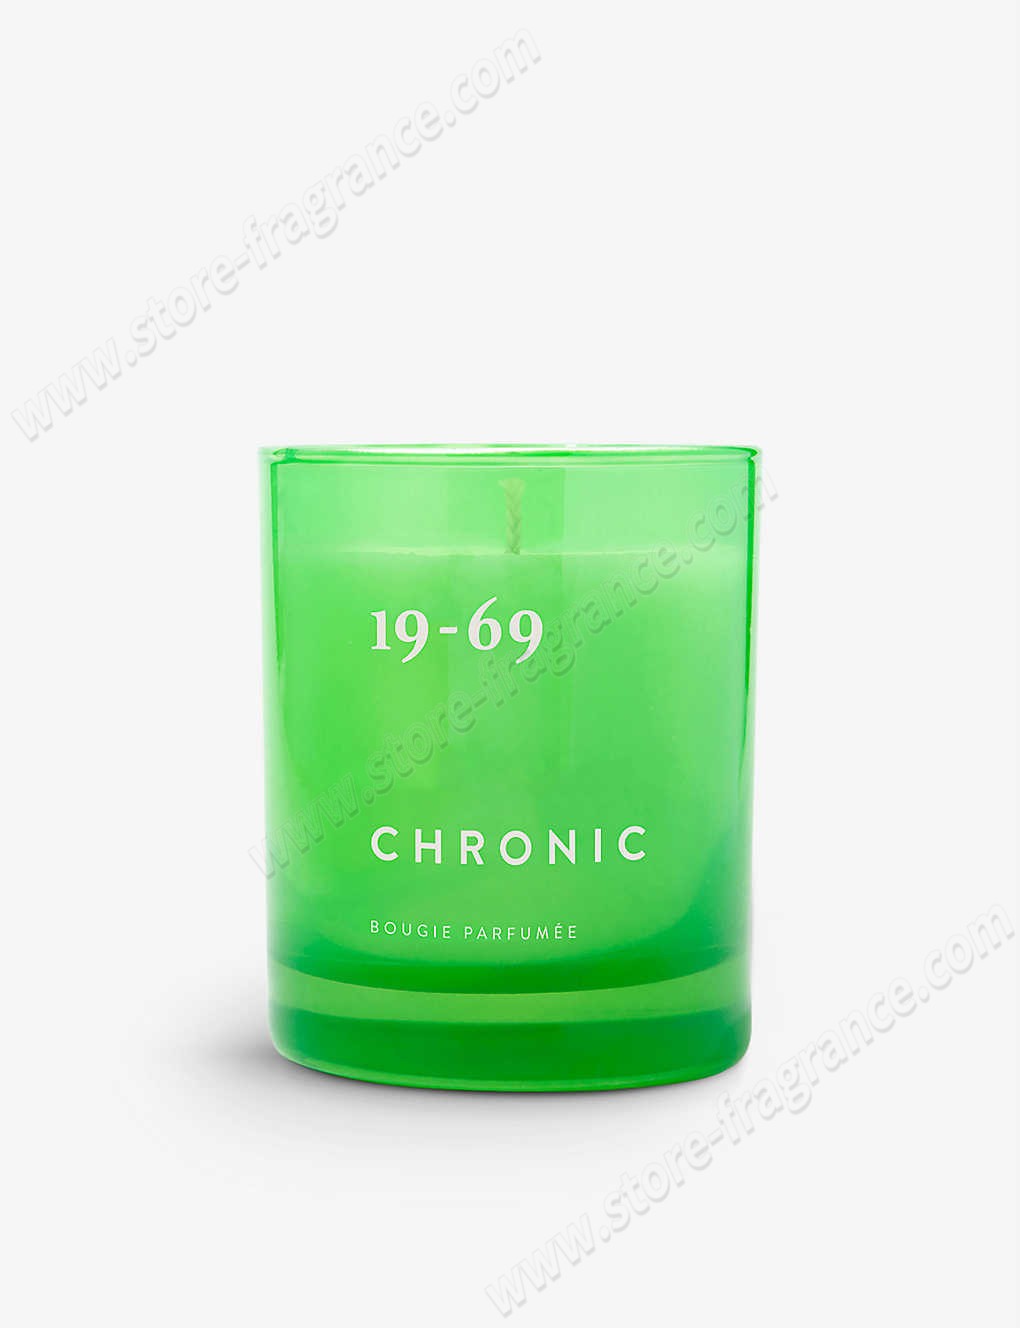 19-69/Chronic vegetable-wax candle 200ml ✿ Discount Store - 19-69/Chronic vegetable-wax candle 200ml ✿ Discount Store